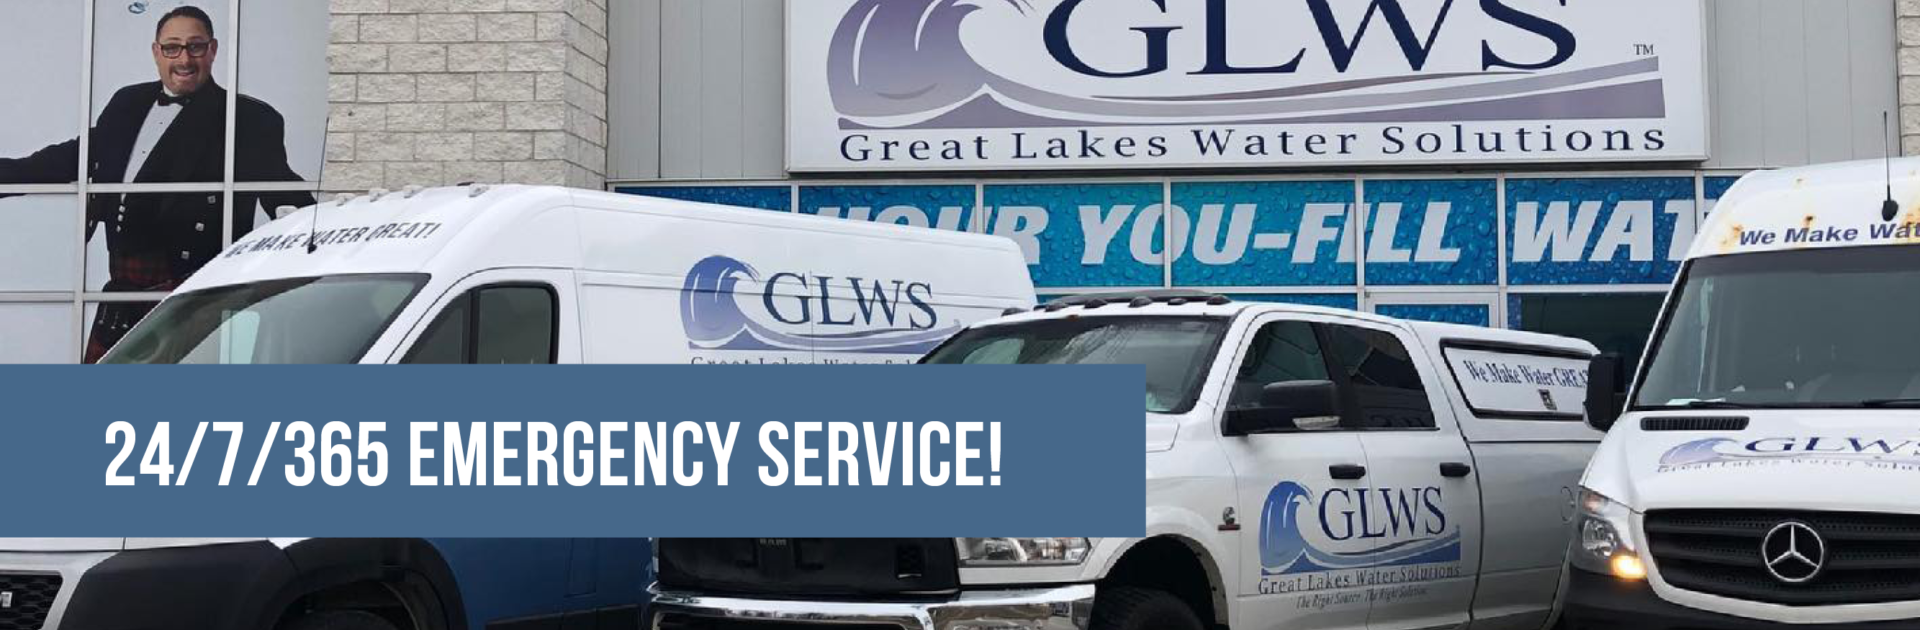 GLWS-WE MAKE WATER GREAT